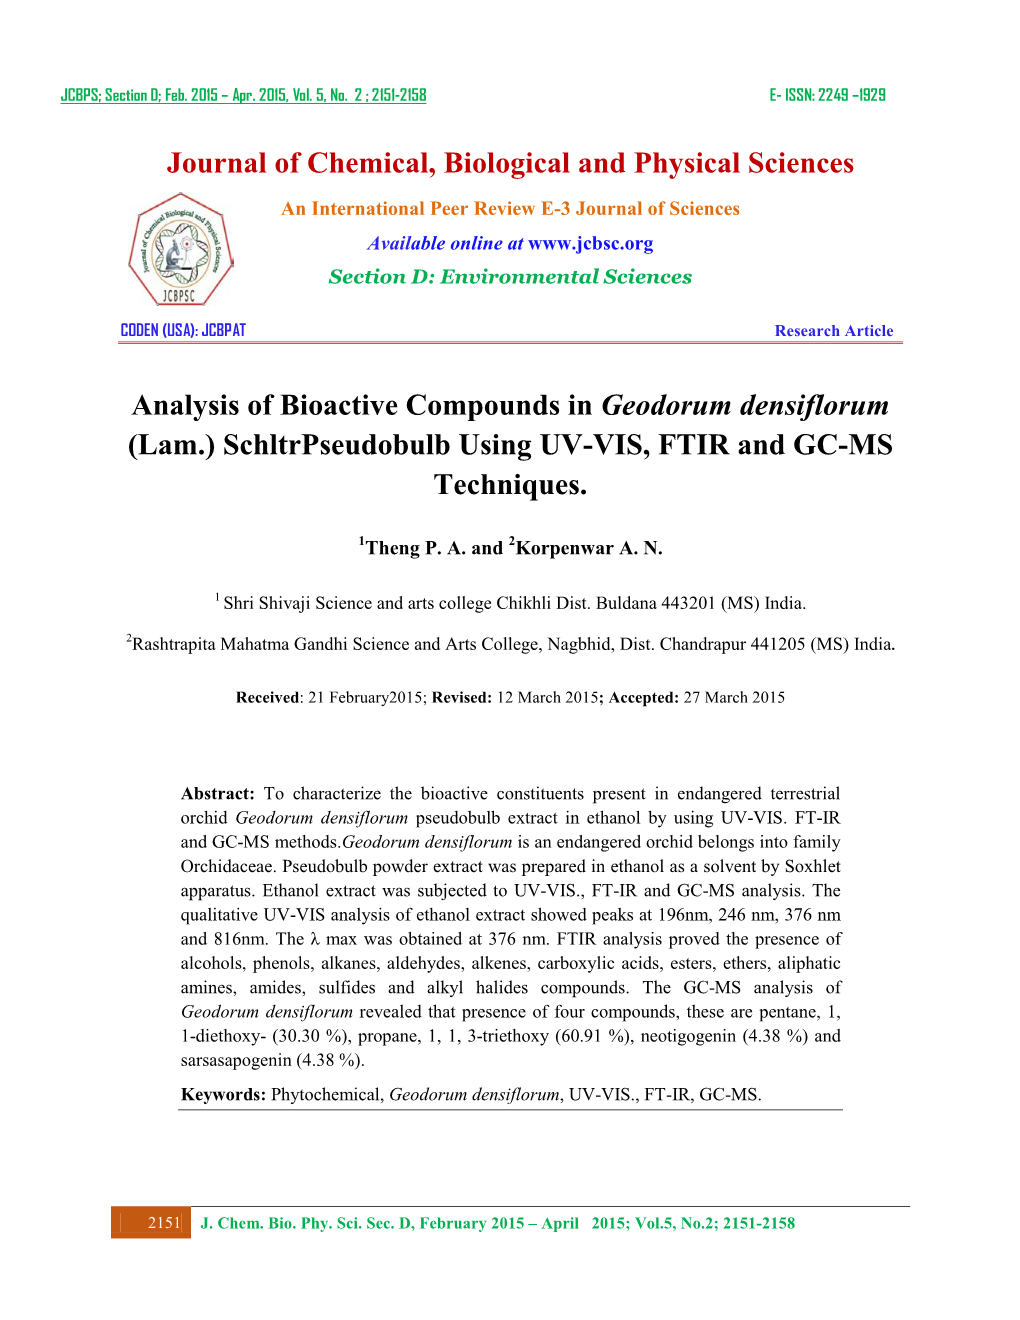 Journal of Chemical, Biological and Physical Sciences Analysis Of